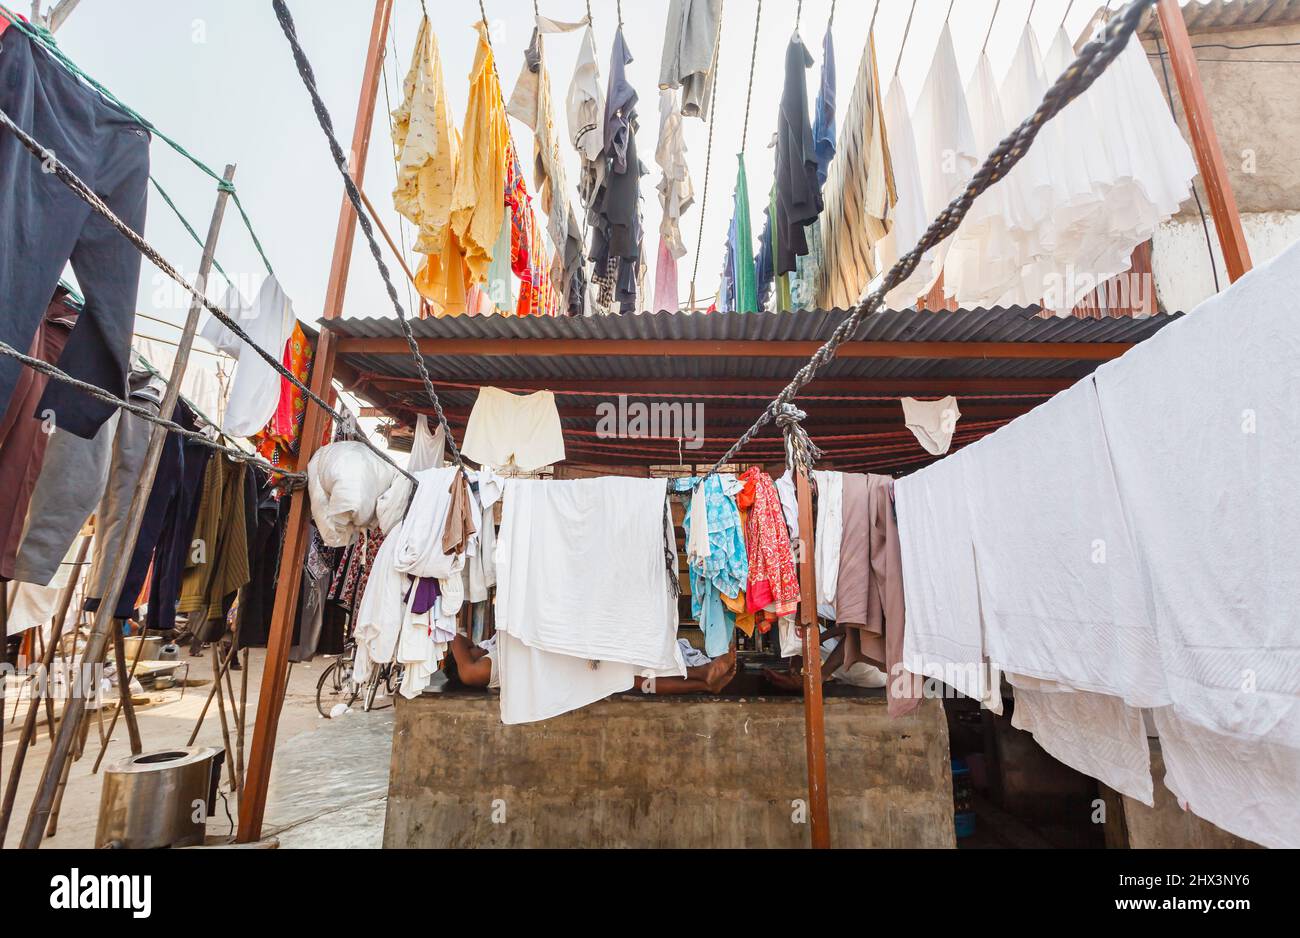 Clean freshly washed clothes and towels hanging out to dry in the open air in Mahalaxmi Dhobi Ghat, a large open air laundromat in Mumbai, India Stock Photo